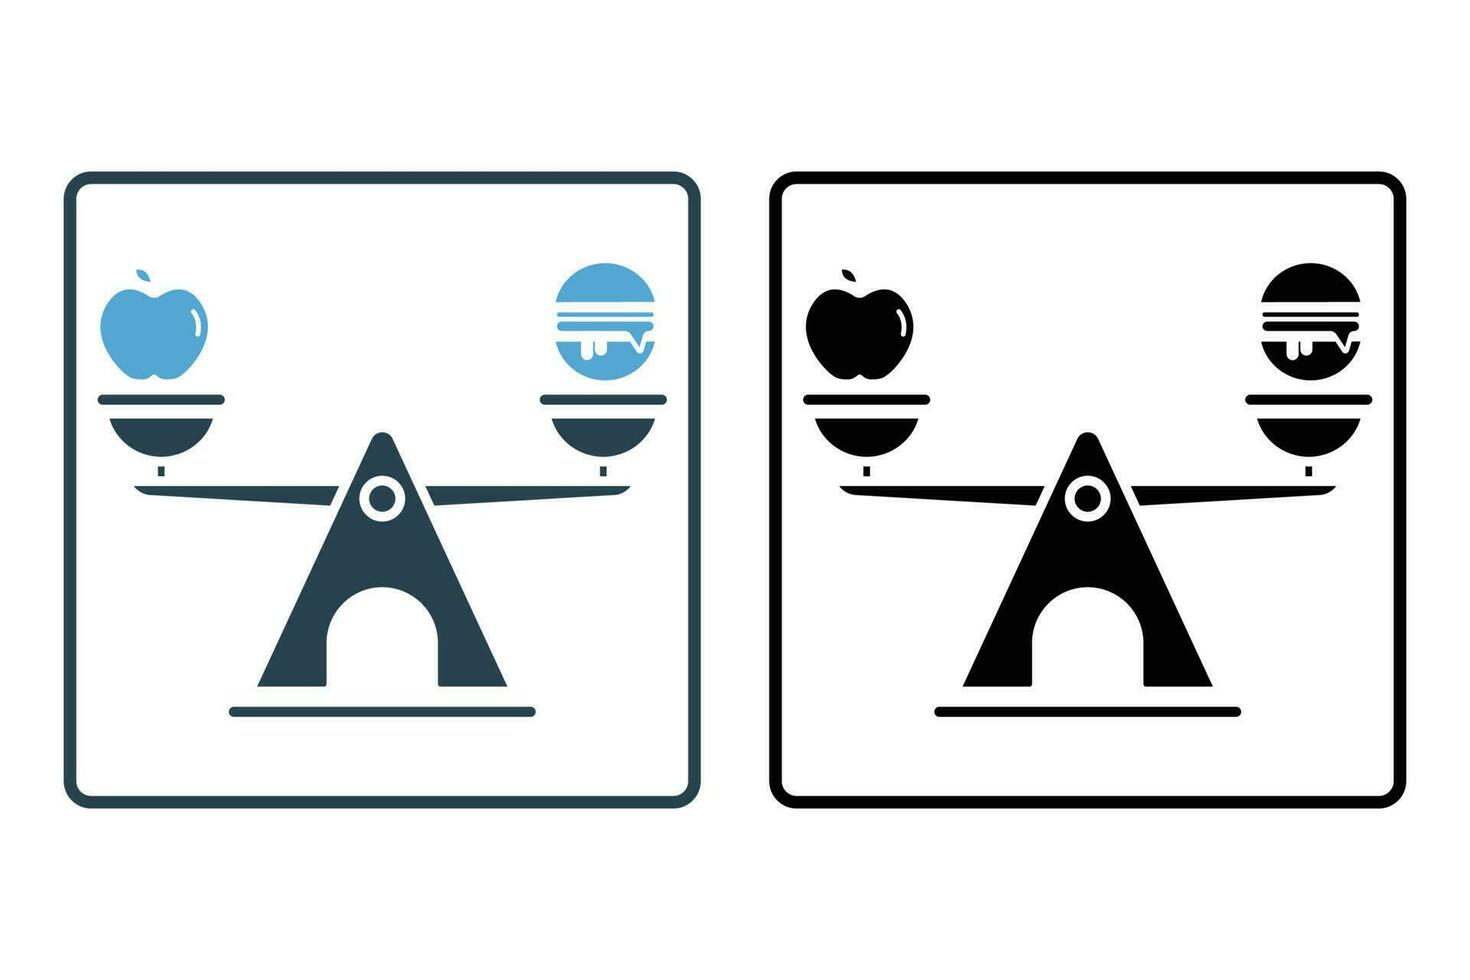 https://static.vecteezy.com/system/resources/previews/024/644/402/non_2x/balanced-diet-icon-apples-burgers-and-scales-icon-related-to-wellness-healthy-solid-icon-style-design-simple-design-editable-vector.jpg